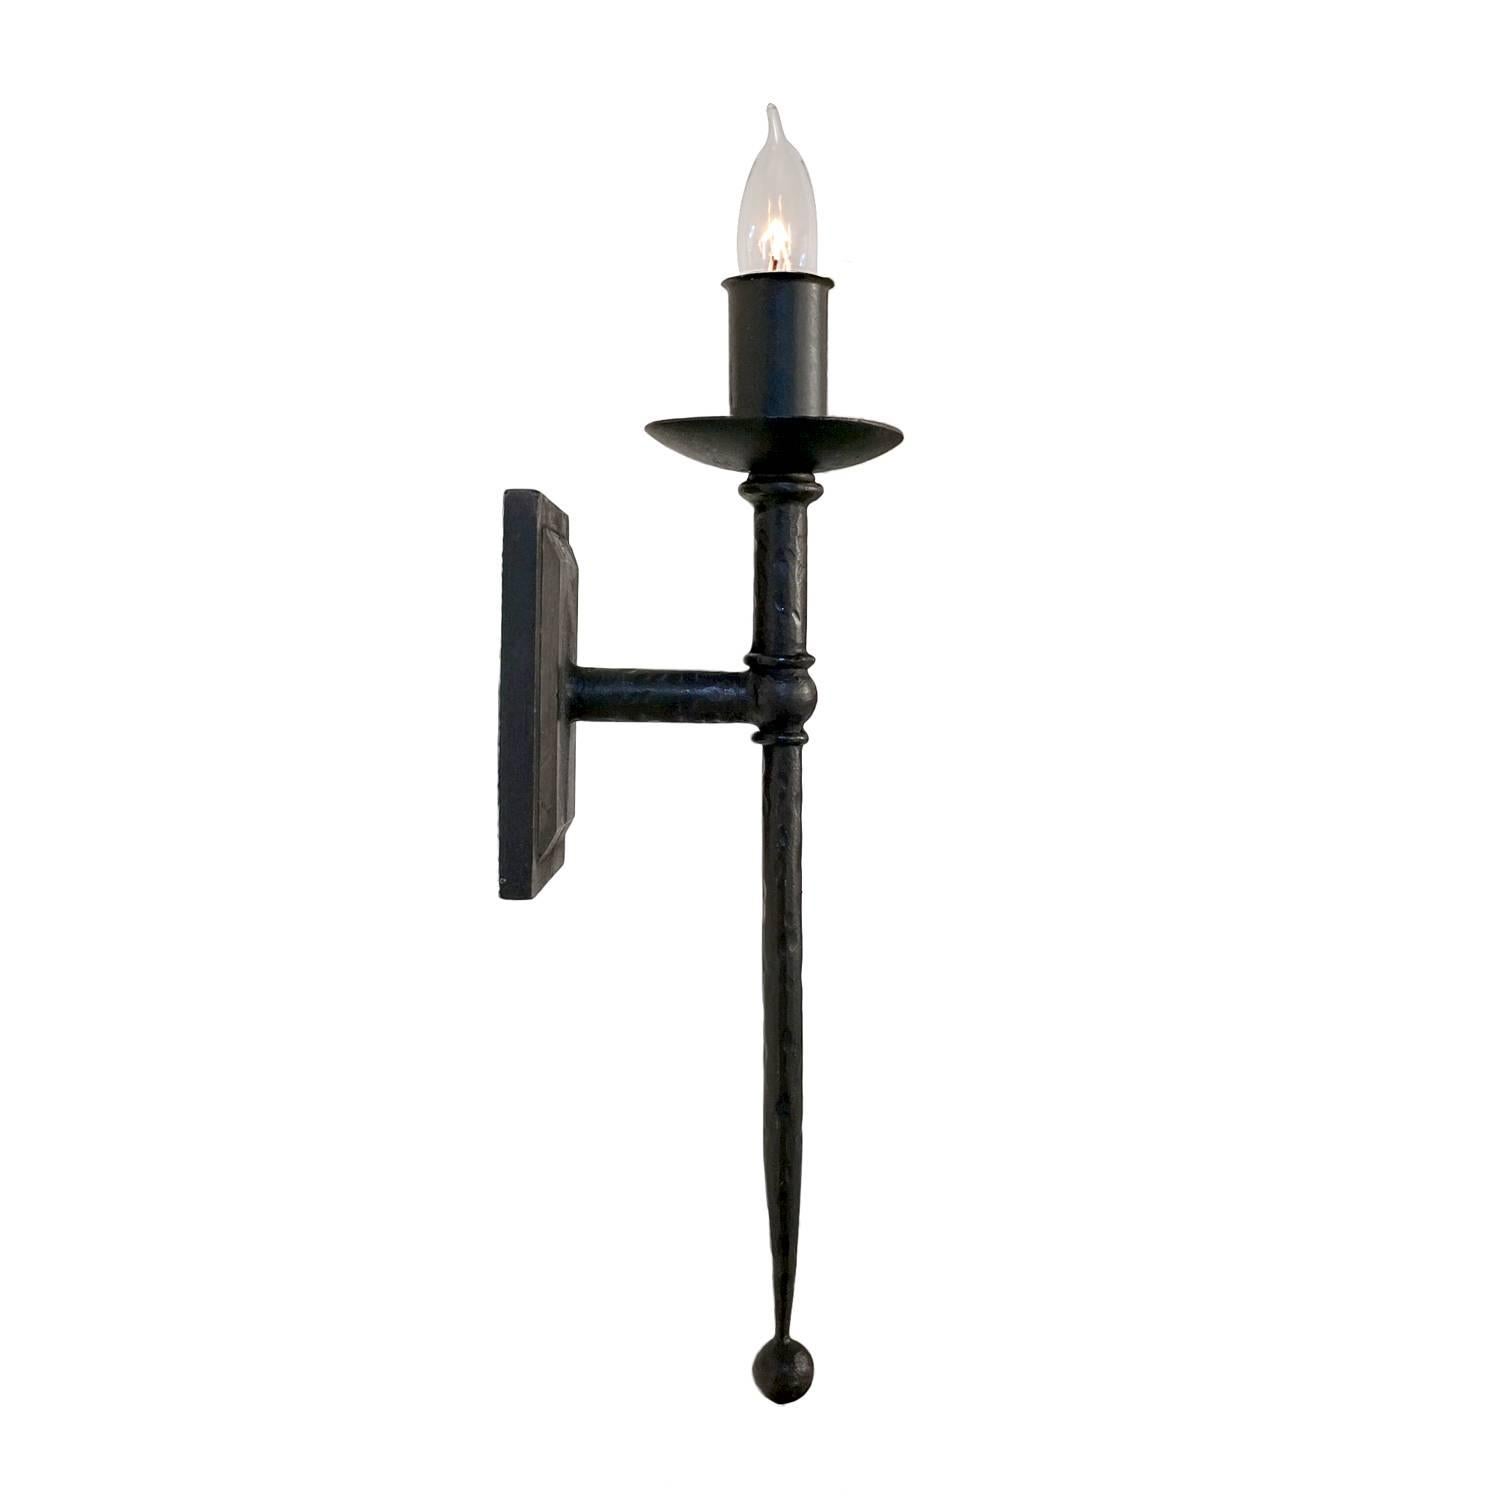 Elegant wall sconce with gentle tapering, clean lines and classic torcheire details.  Hammered texturing and a rich waxed finish gives this wrought iron fixture a softer look.  At home in a classic Mediterranean or Spanish Colonial backdrop. 